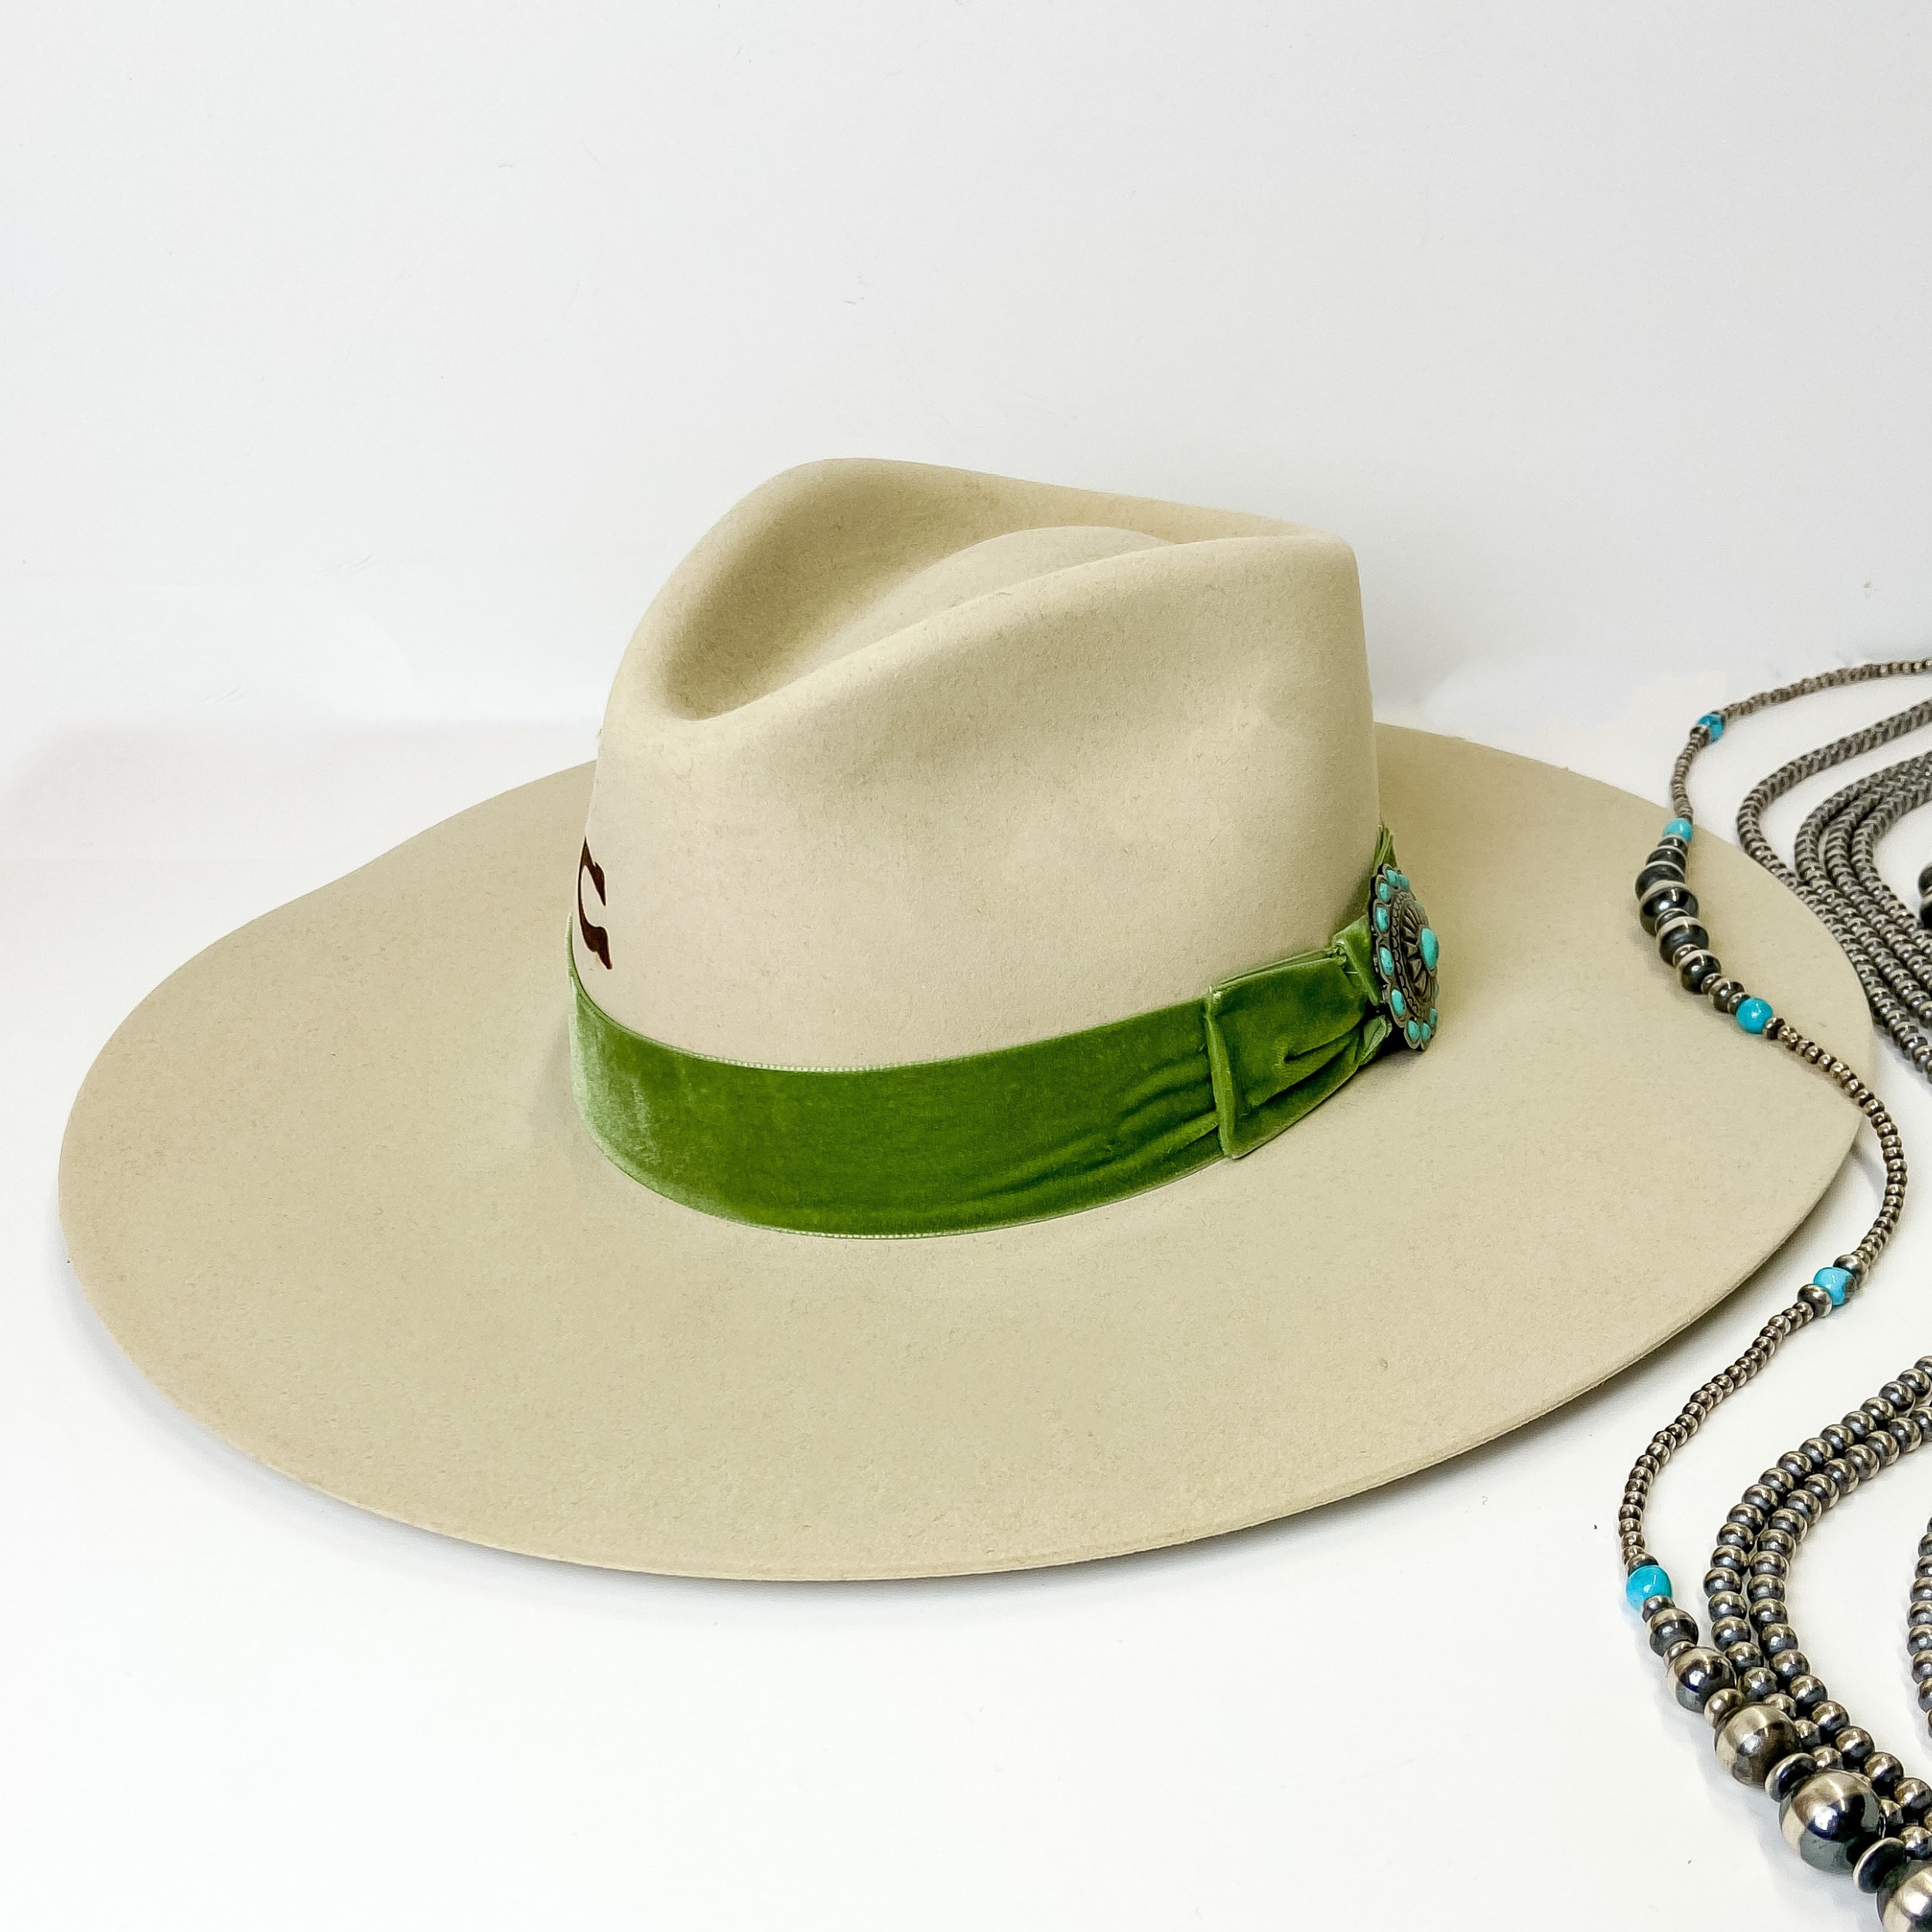 An ivory felt hat with a green velvet band with a silver tone concho with turquoise stones. This hat is pictured on a white background with genuine Navajo jewelry.